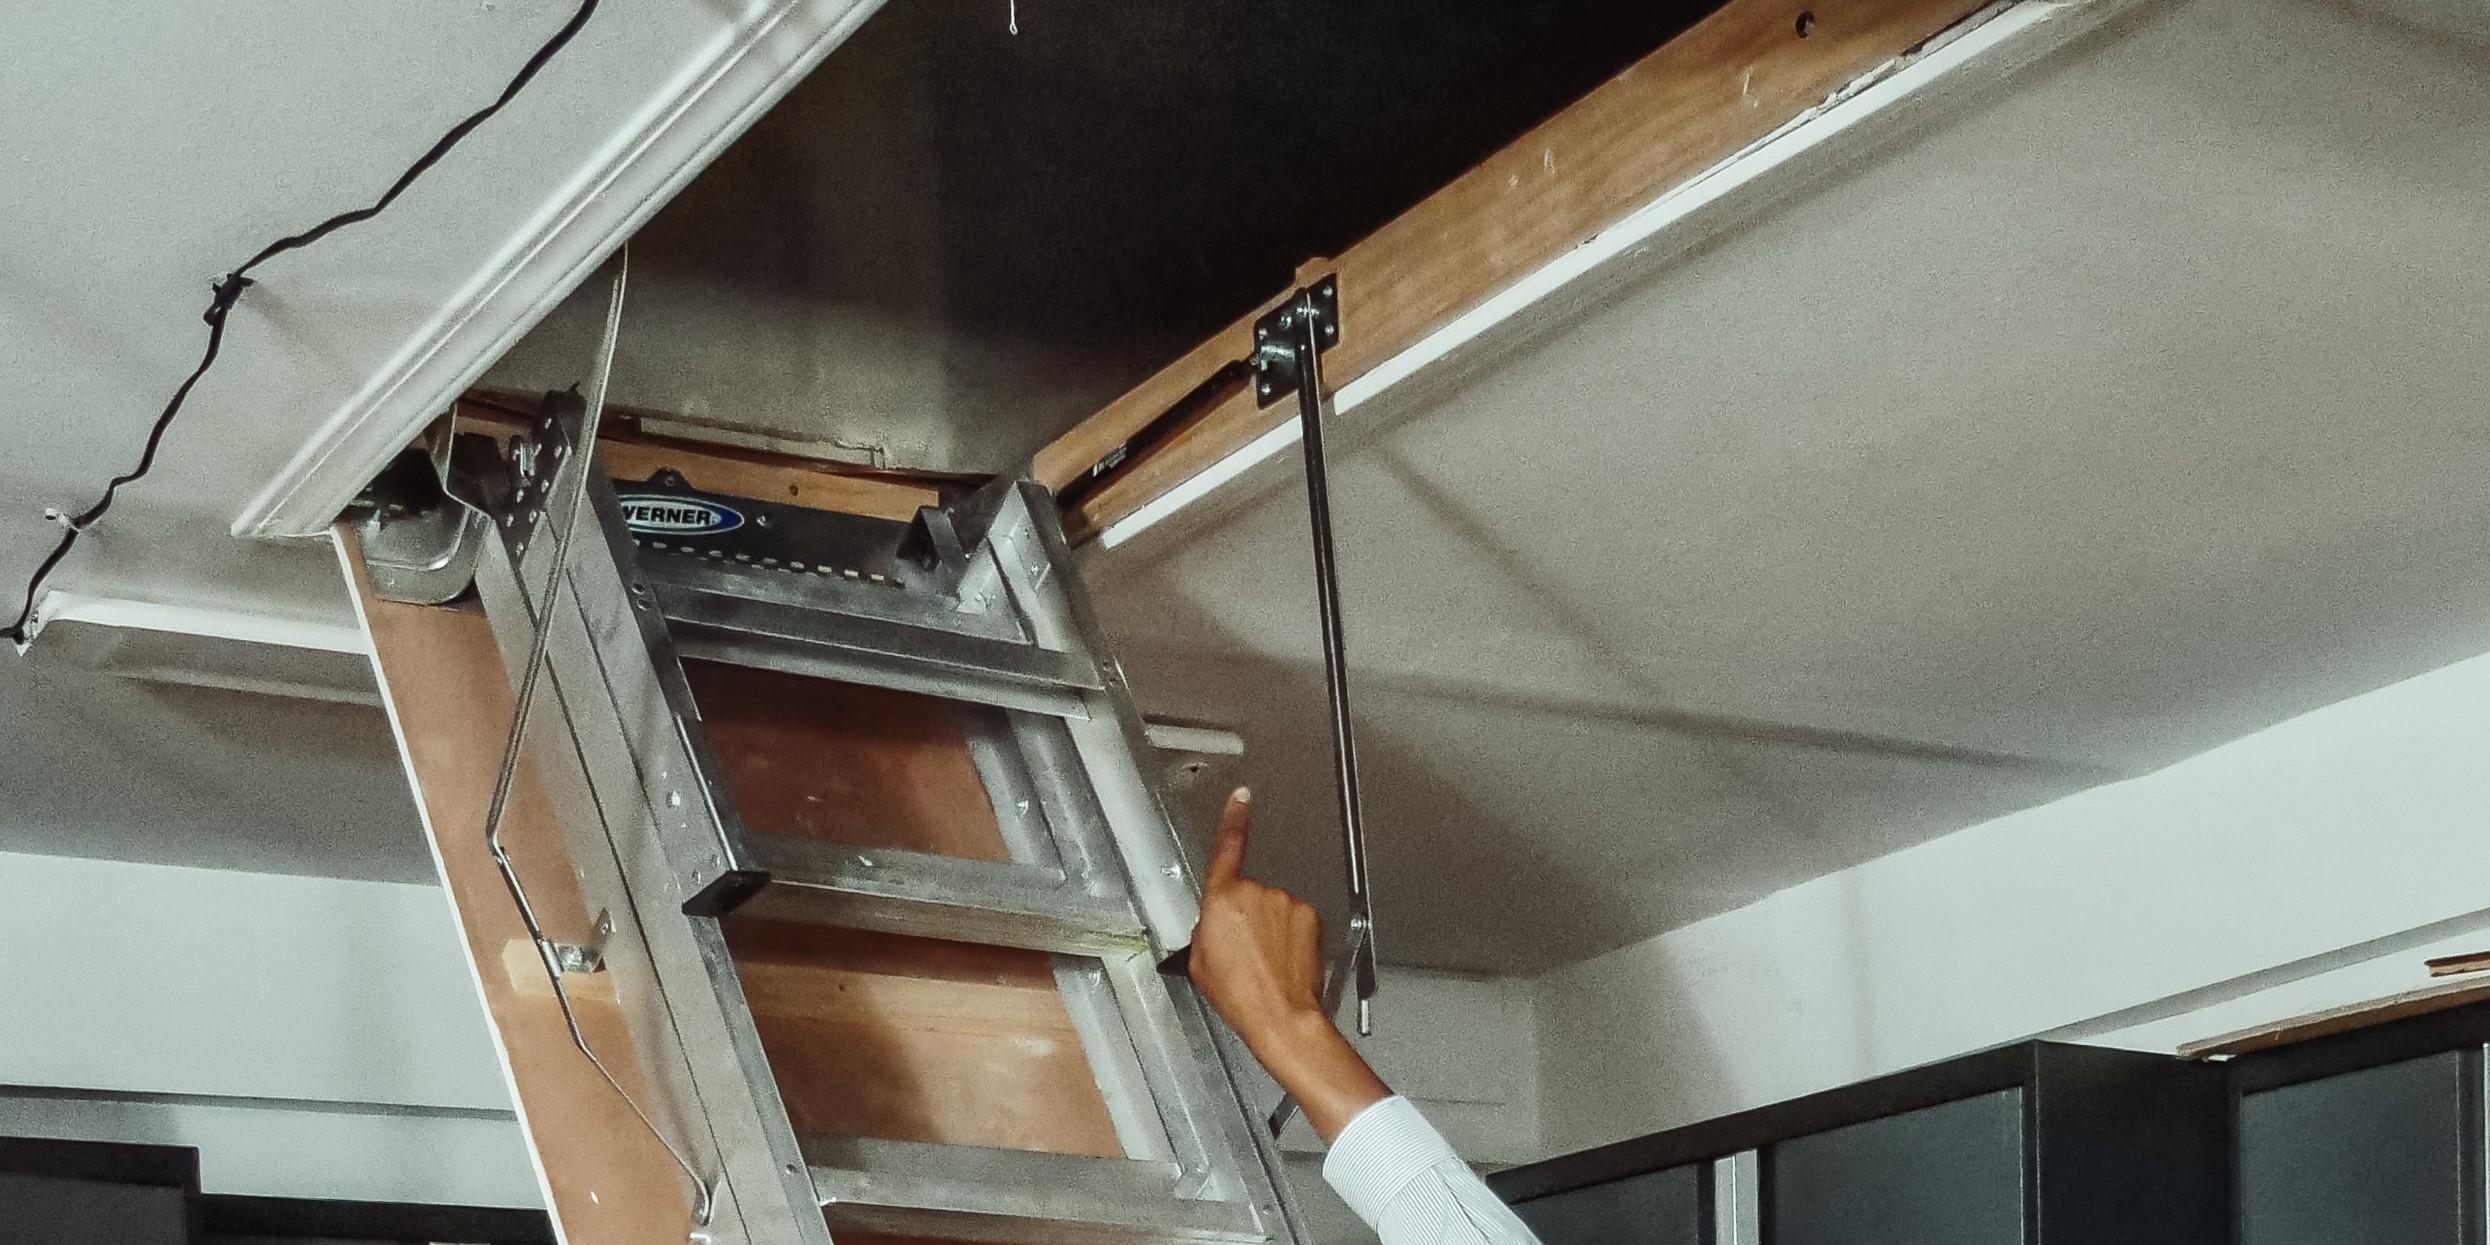 How to Adjust the Springs on Attic Ladder